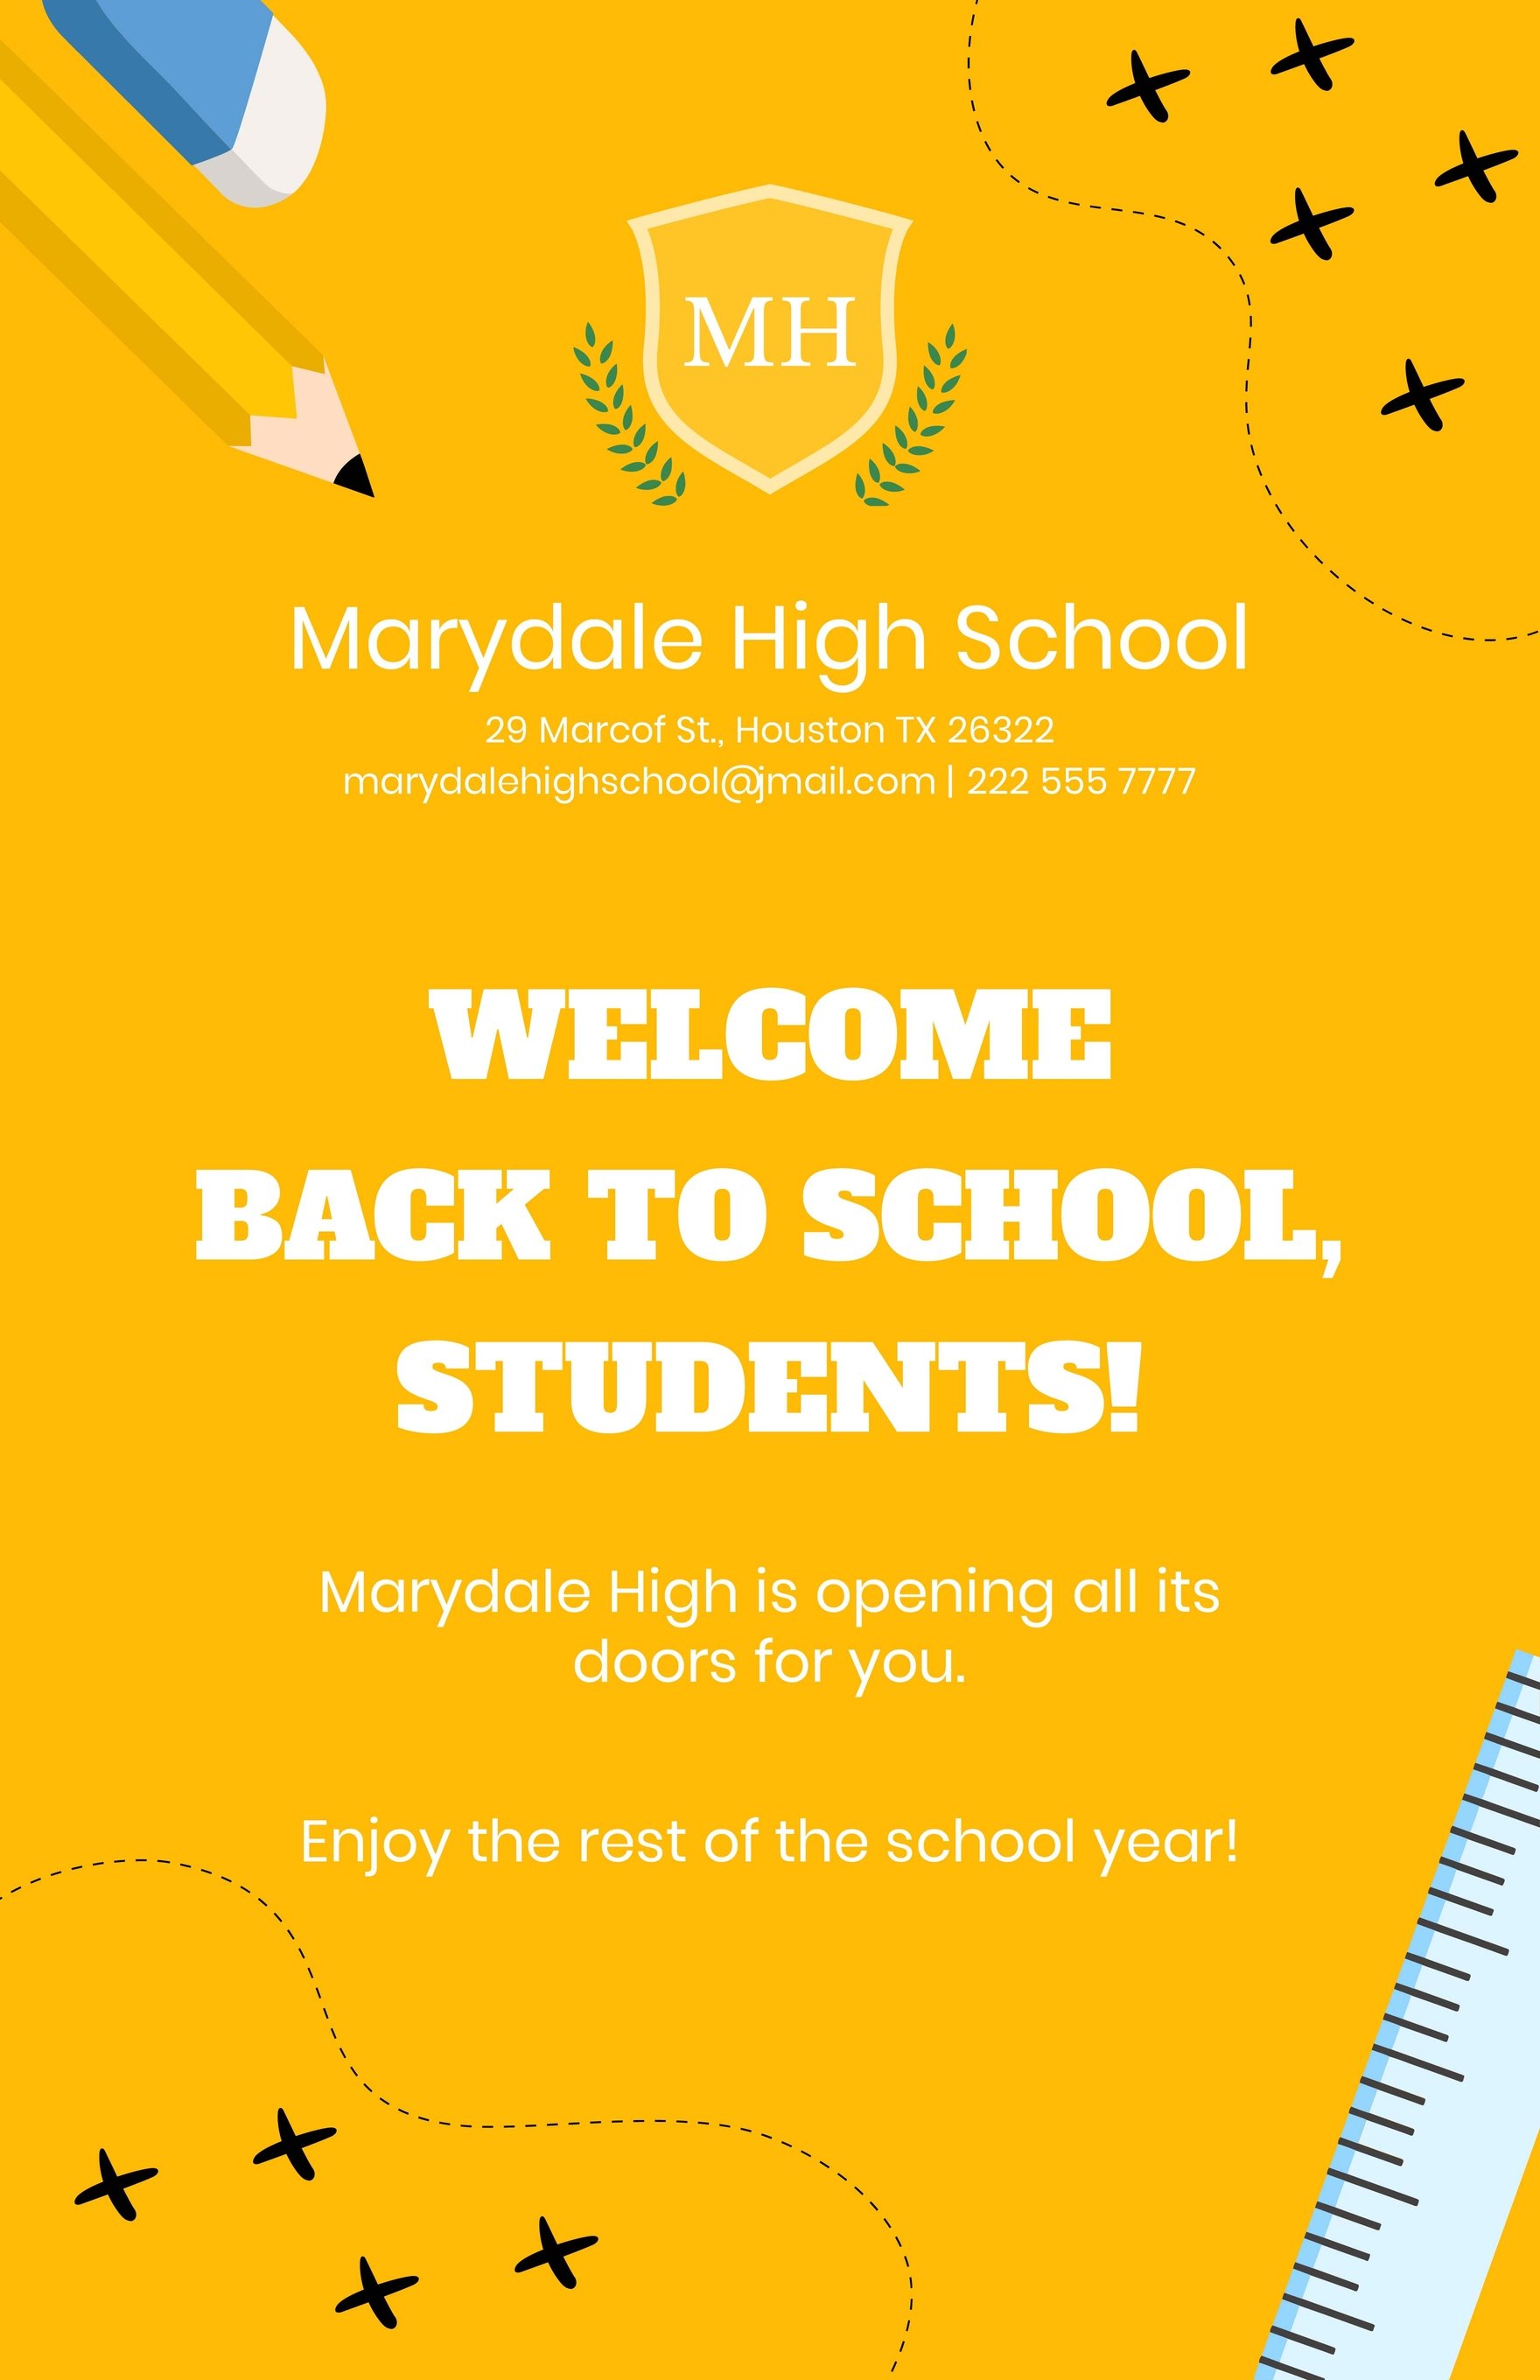 Welcome Back To School Poster in Word, Google Docs, Illustrator, PSD, Apple Pages, Publisher